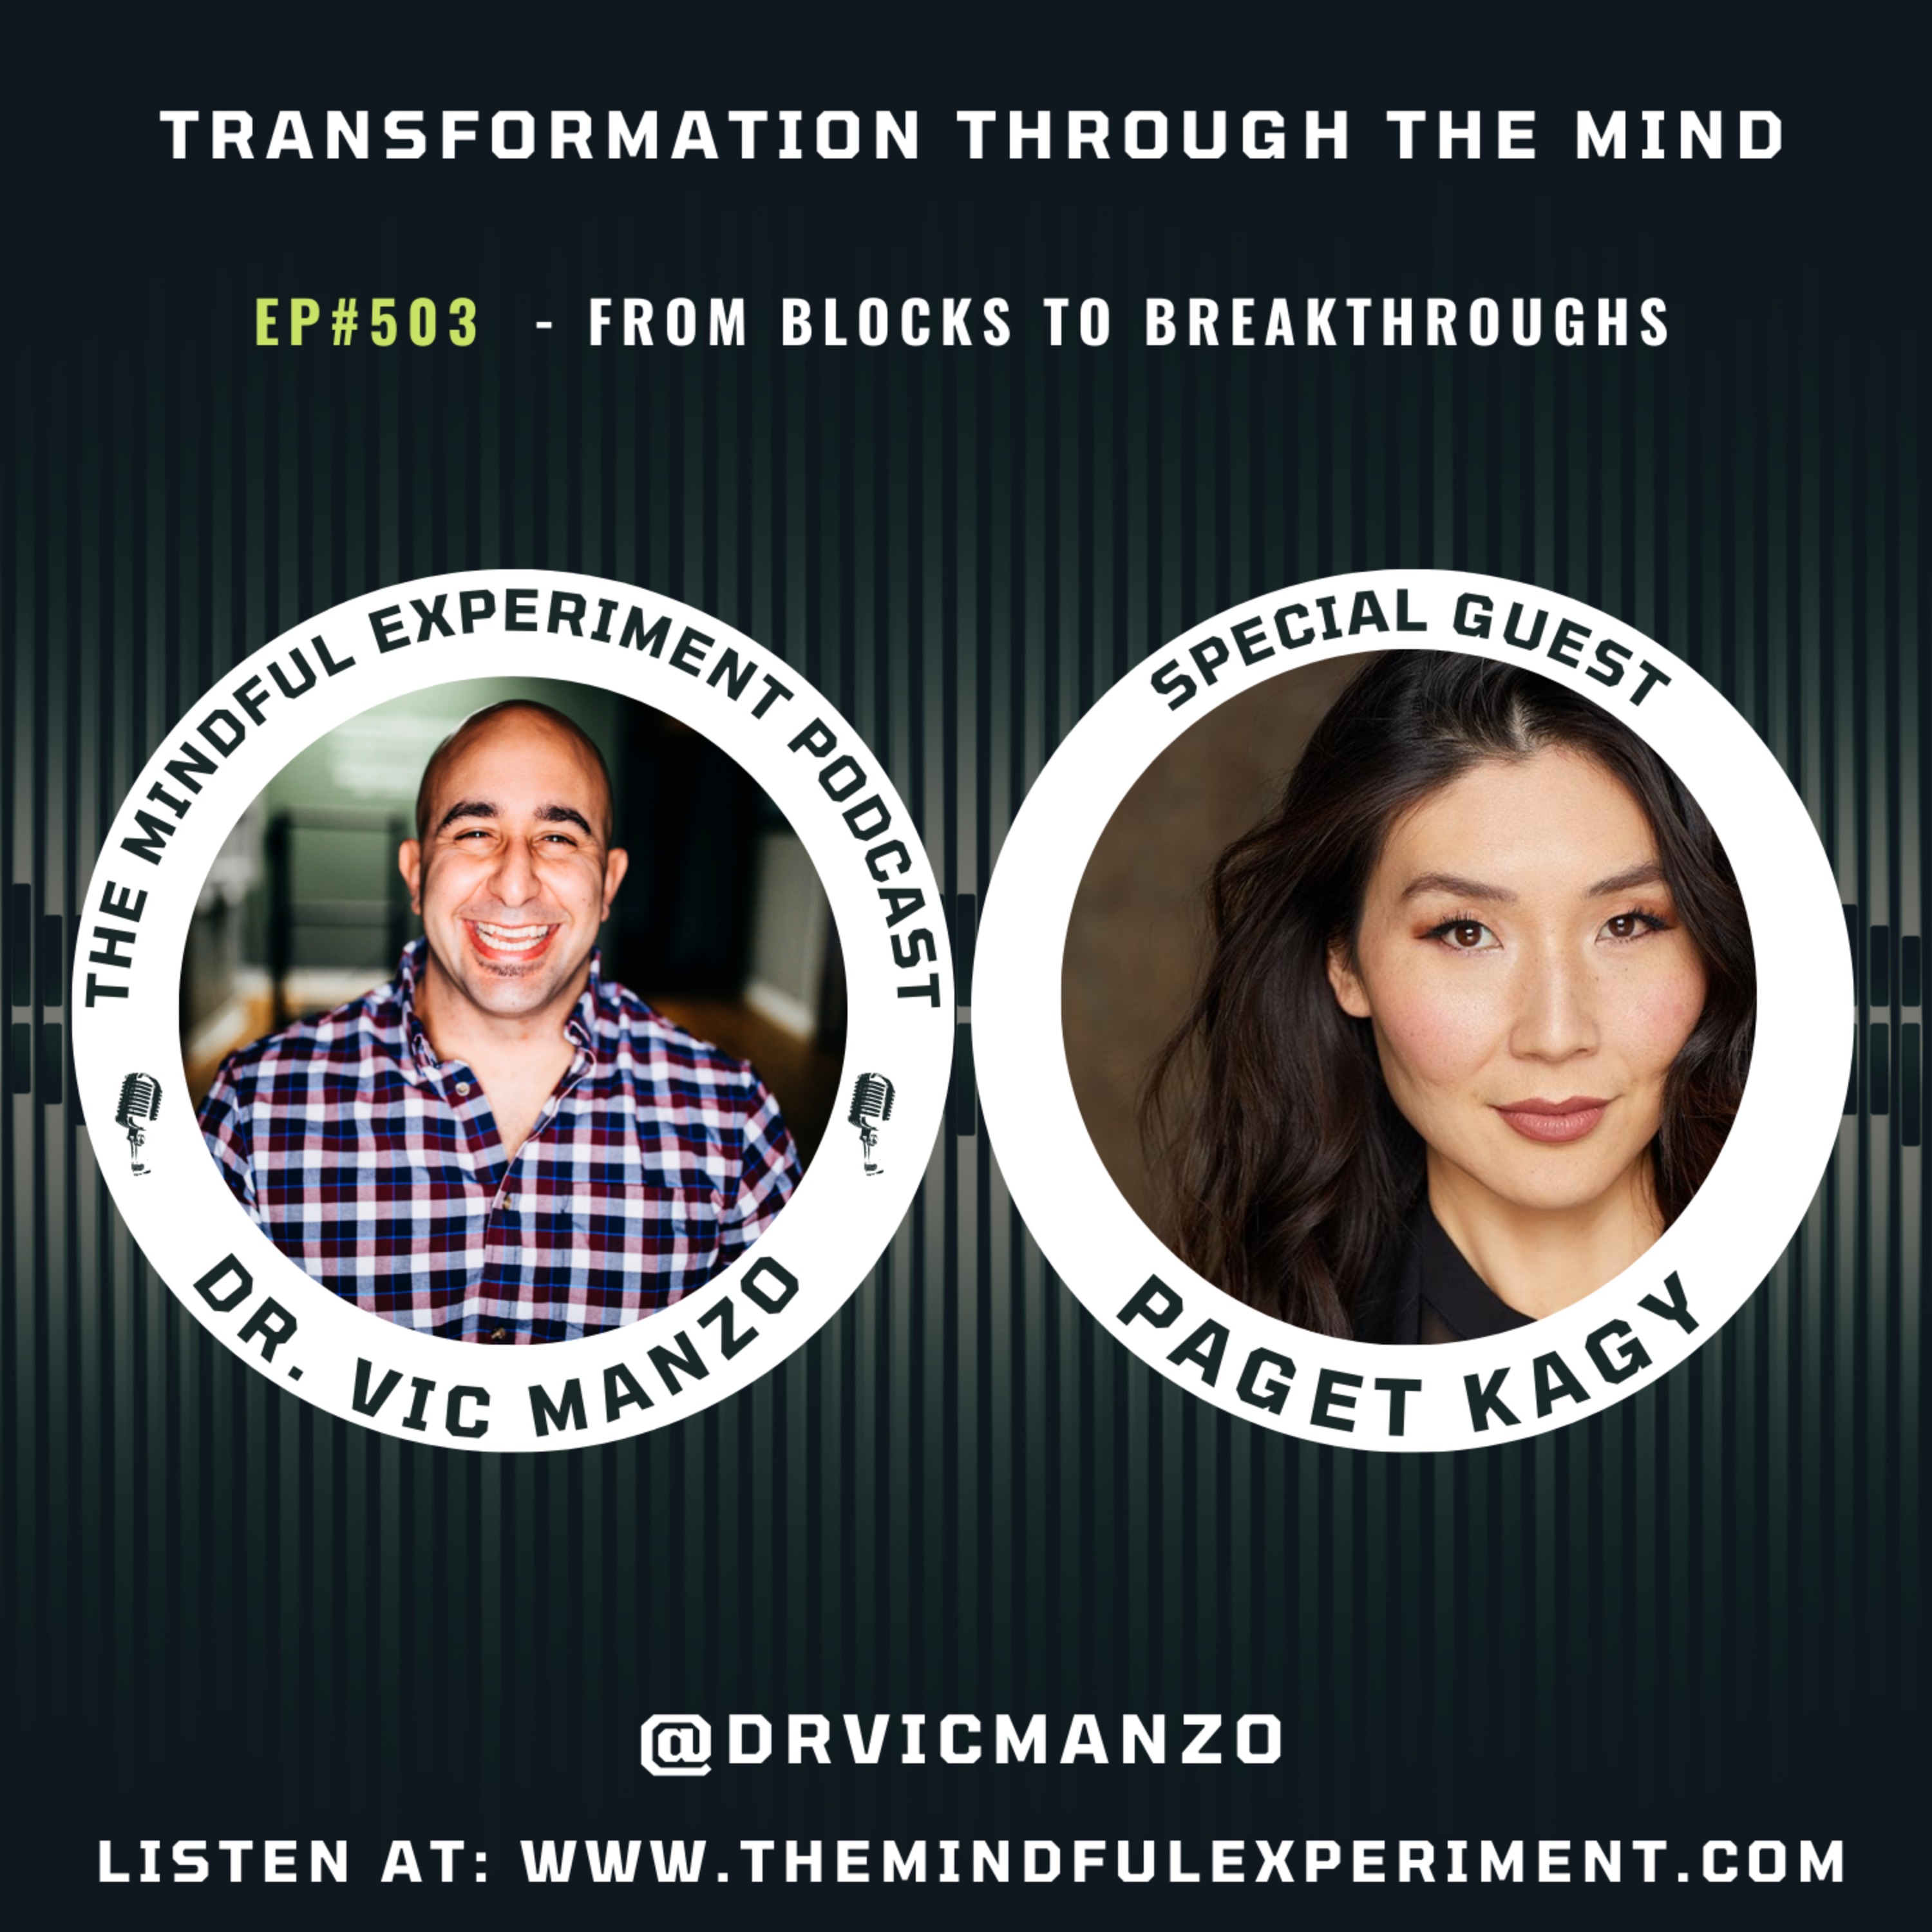 EP#503 - From Blocks to Breakthroughs with Special Guest: Paget Kagy